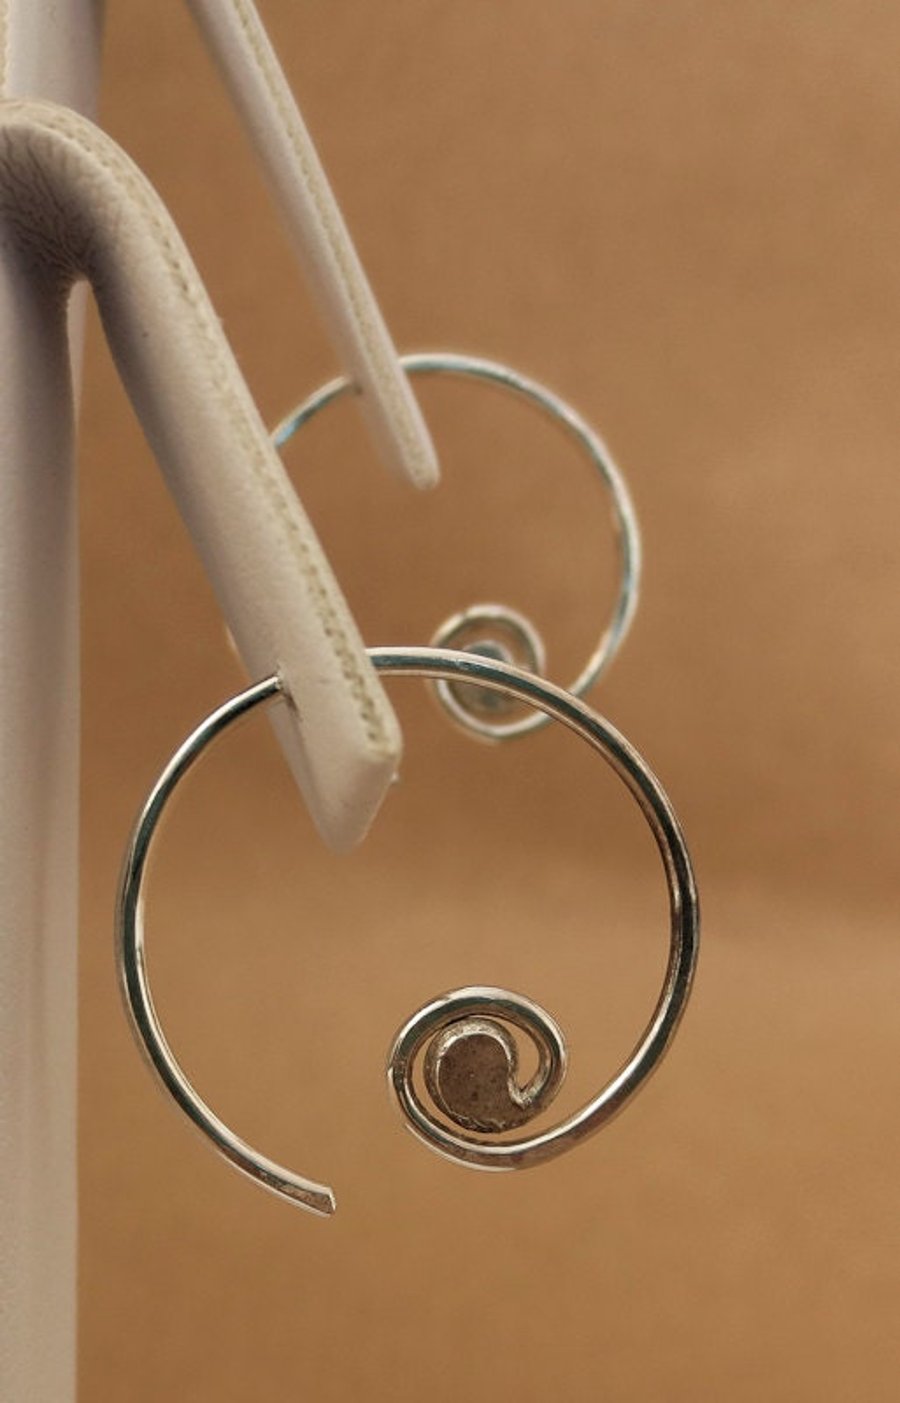 Spiral hoop earrings in sterling silver. made to order for you.